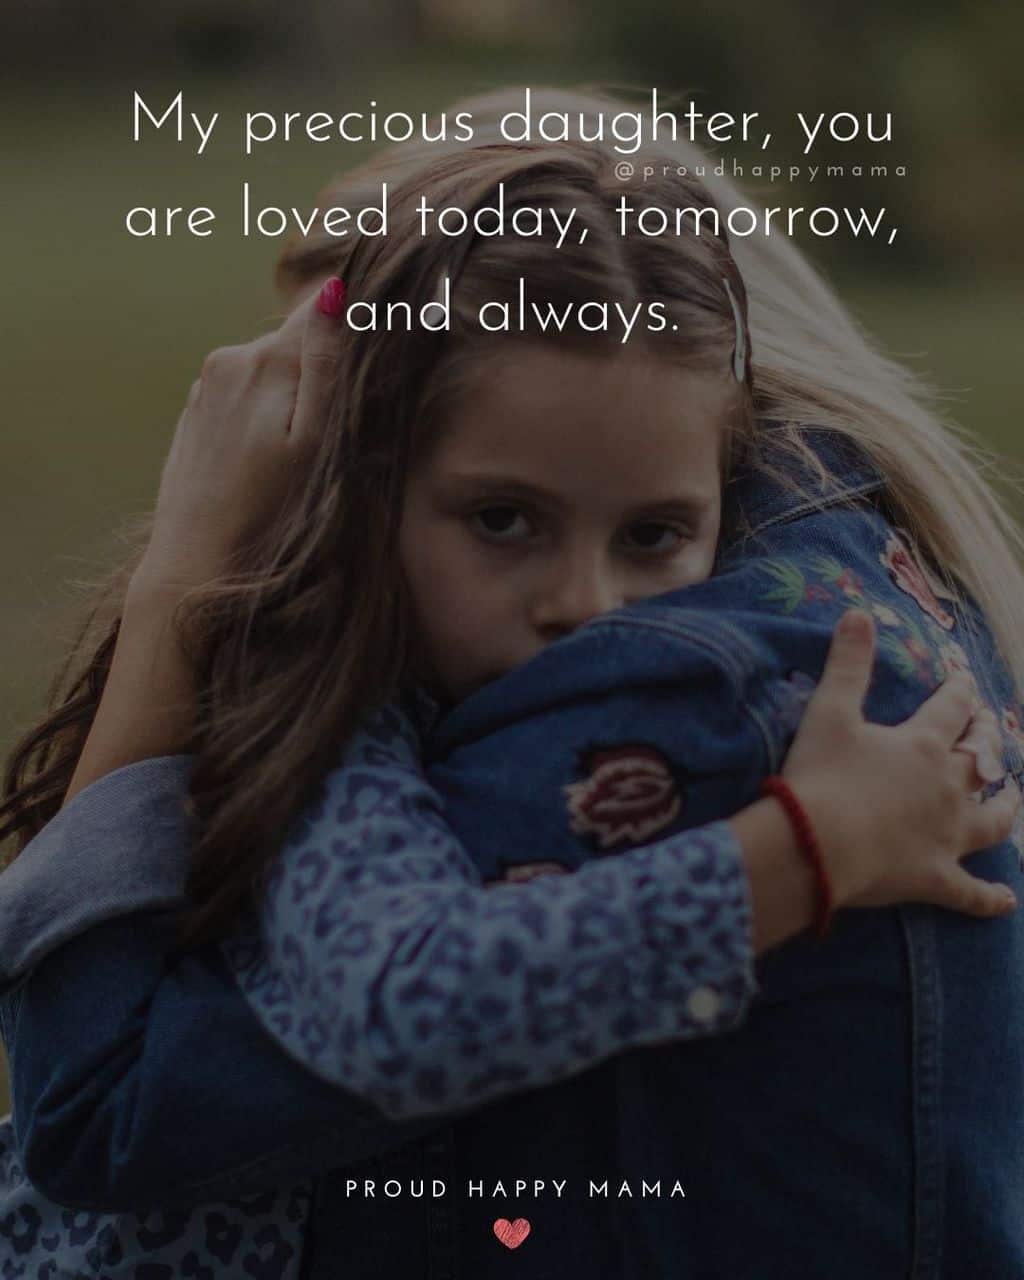 beautiful words for my daughter - ‘My precious daughter, you are loved today, tomorrow, and always.’